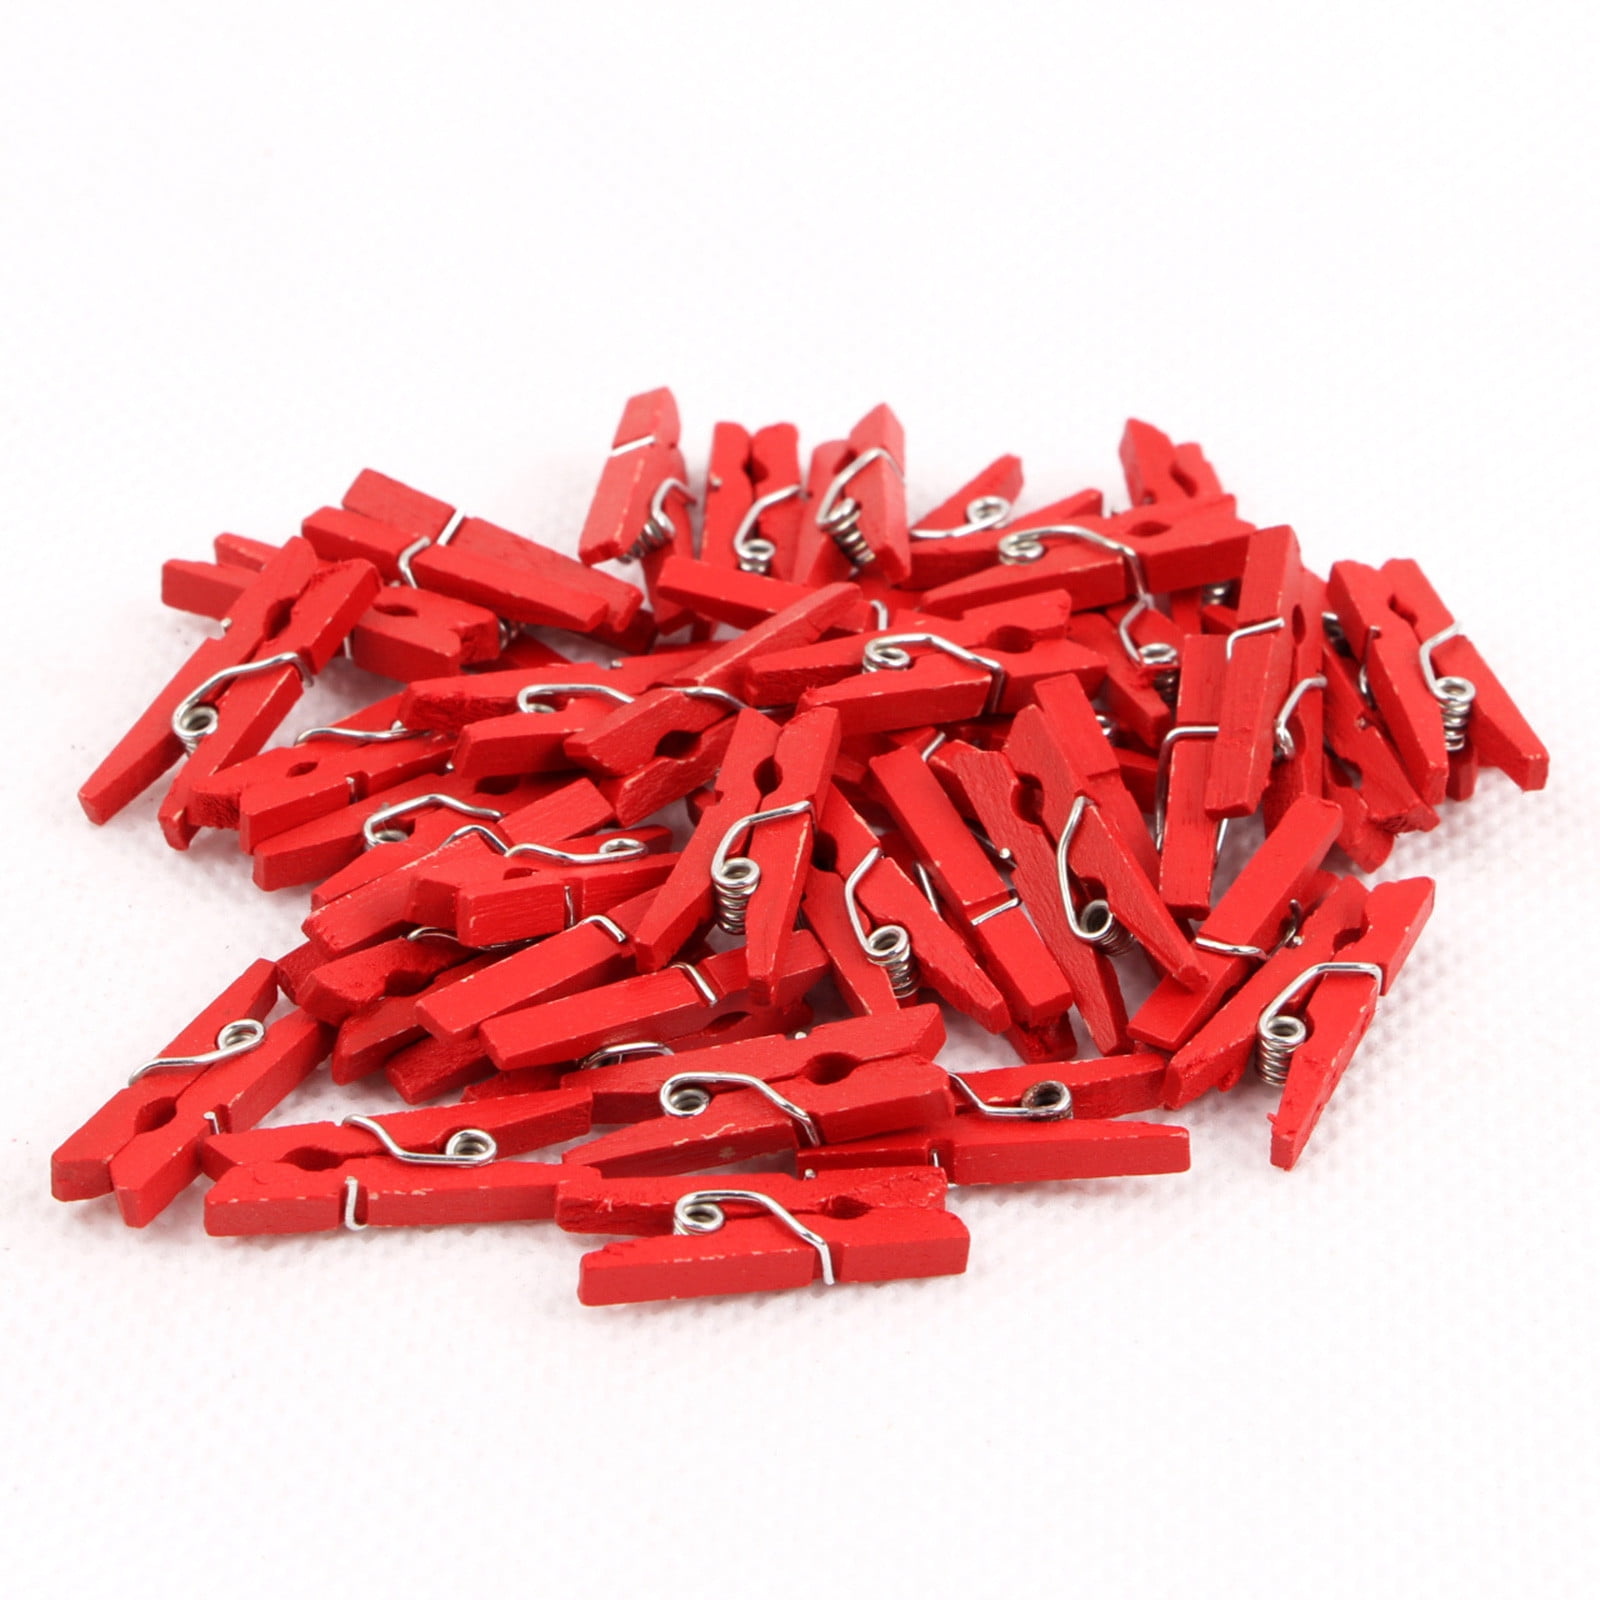 Homchy Mini Clothes Pins for Photo 50pcs 25mm Colorful Natural Wood Clothespins Craft Decoration Wooden Clips, Kids Unisex, Size: One size, Red